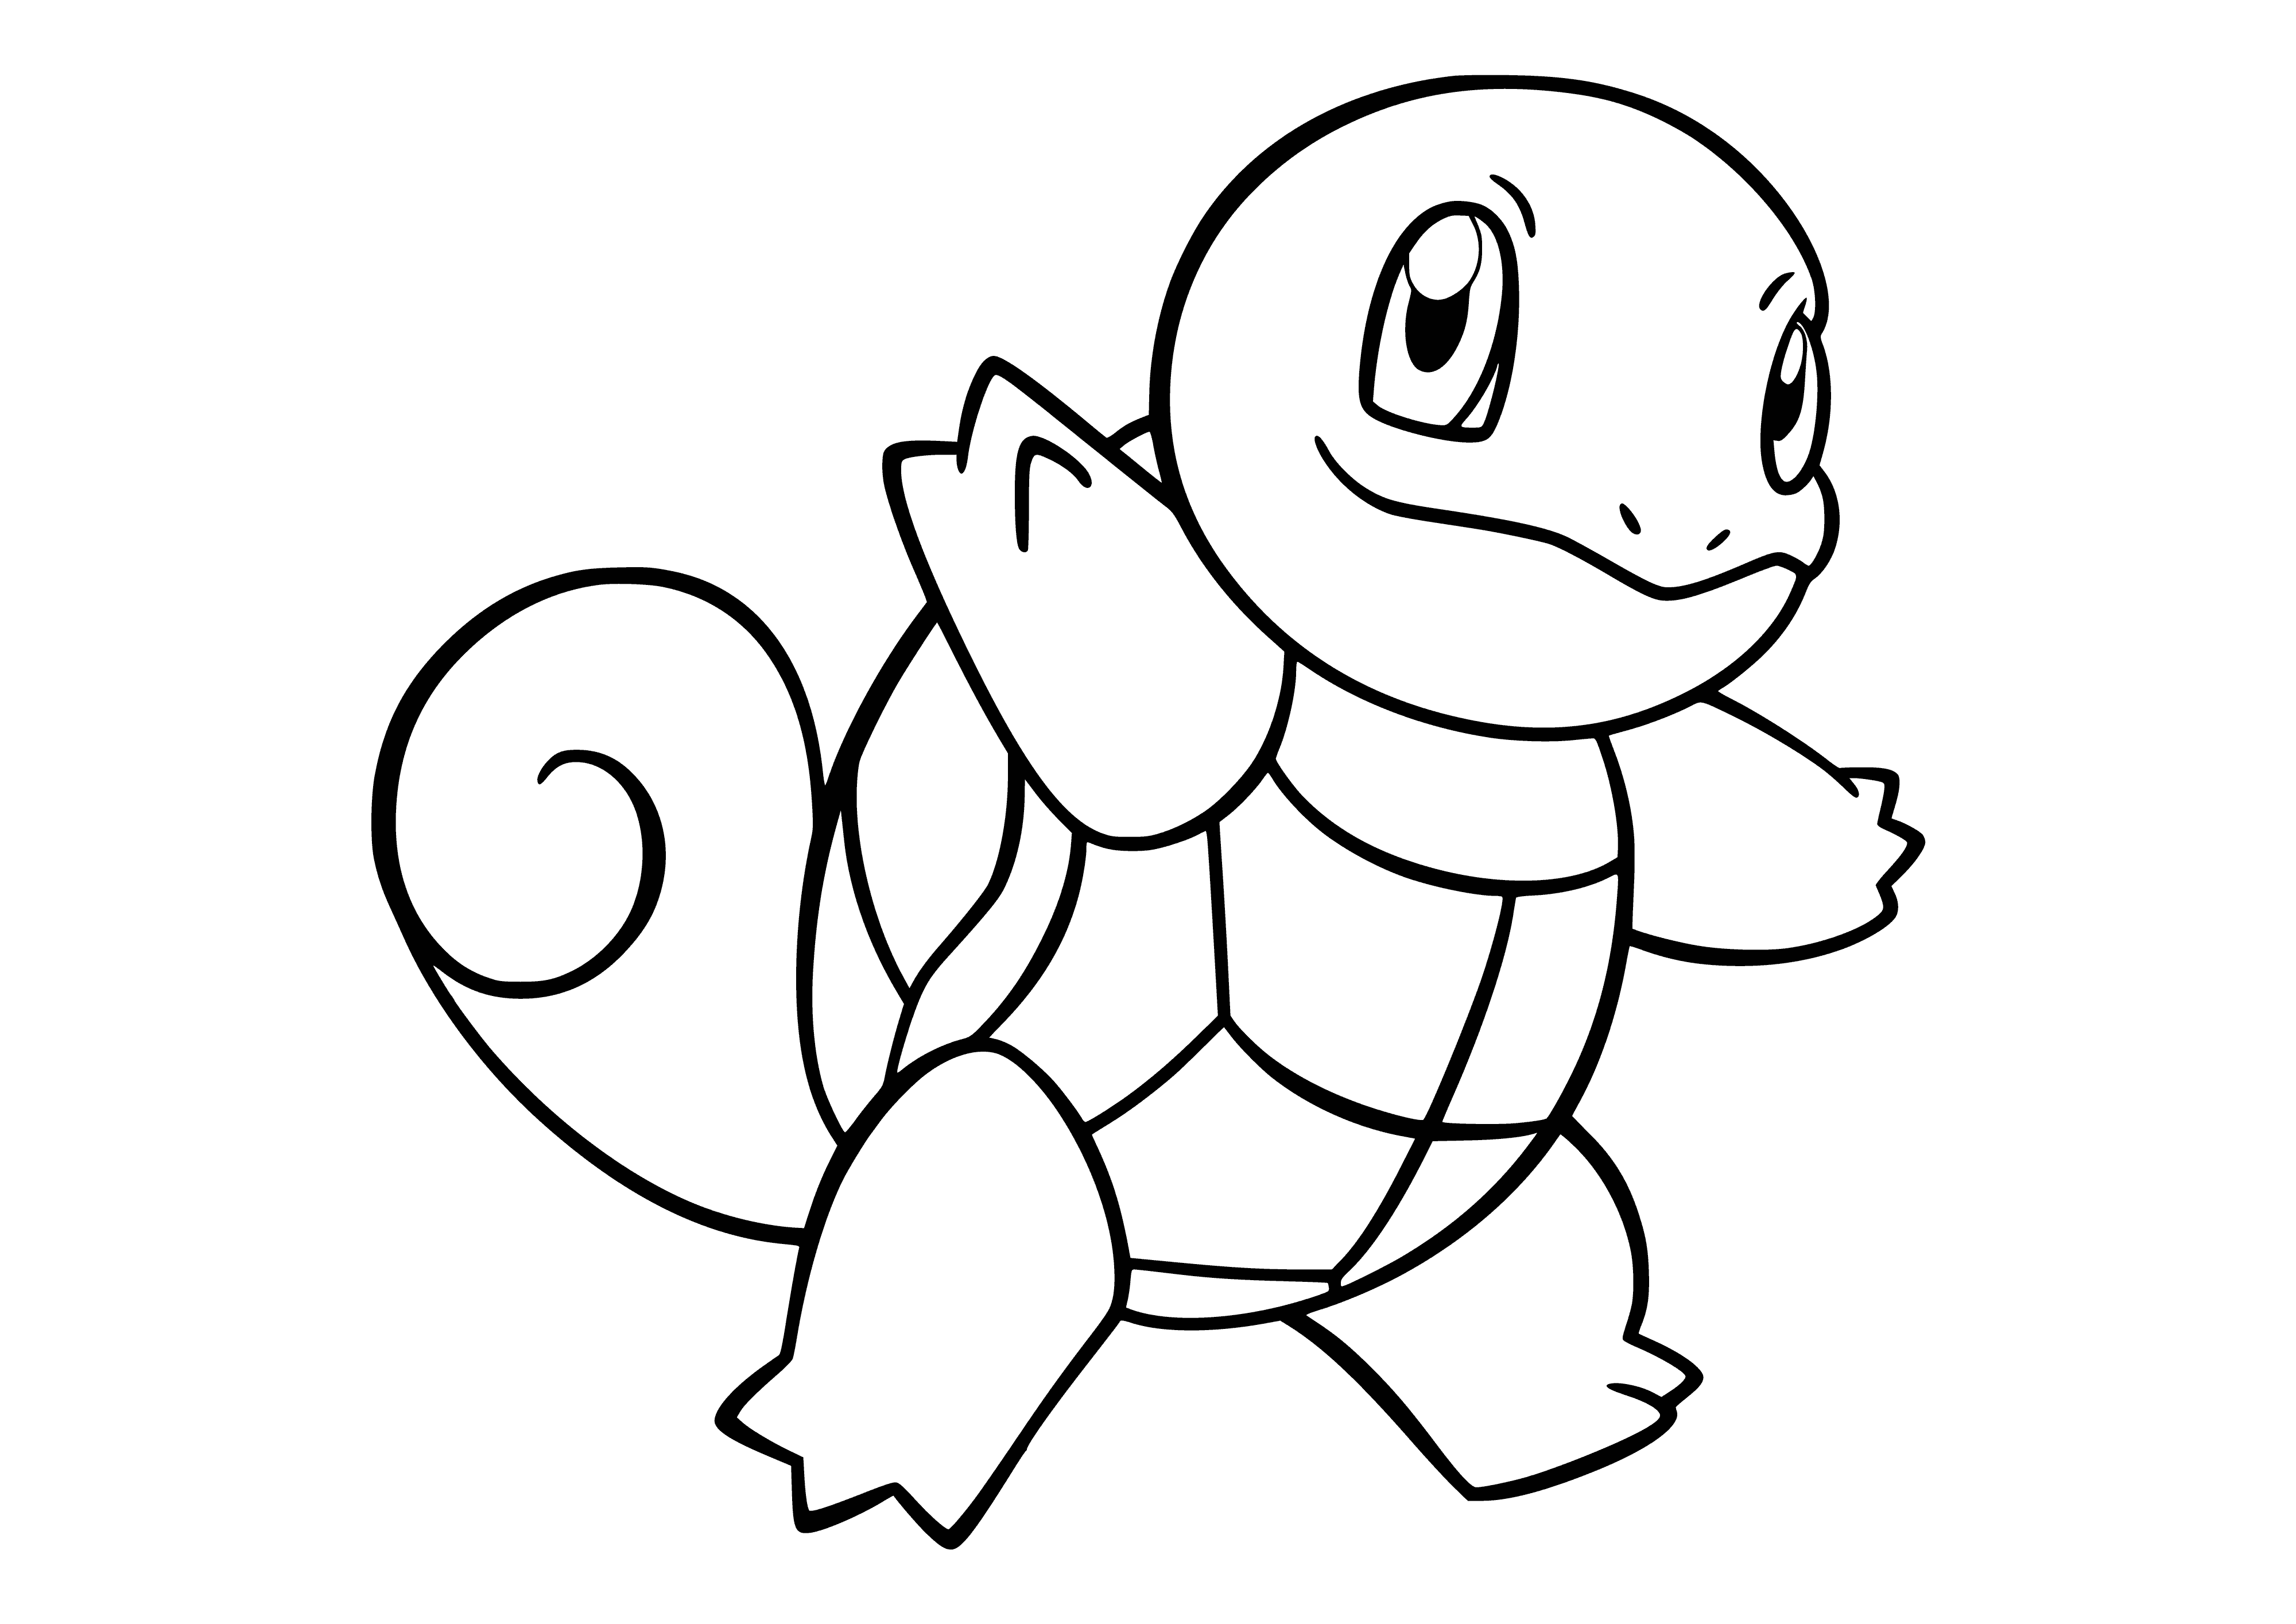 coloring page: Blue turtle-like creature with protruding lower jaw, large eyes, plates on back, and small tail.